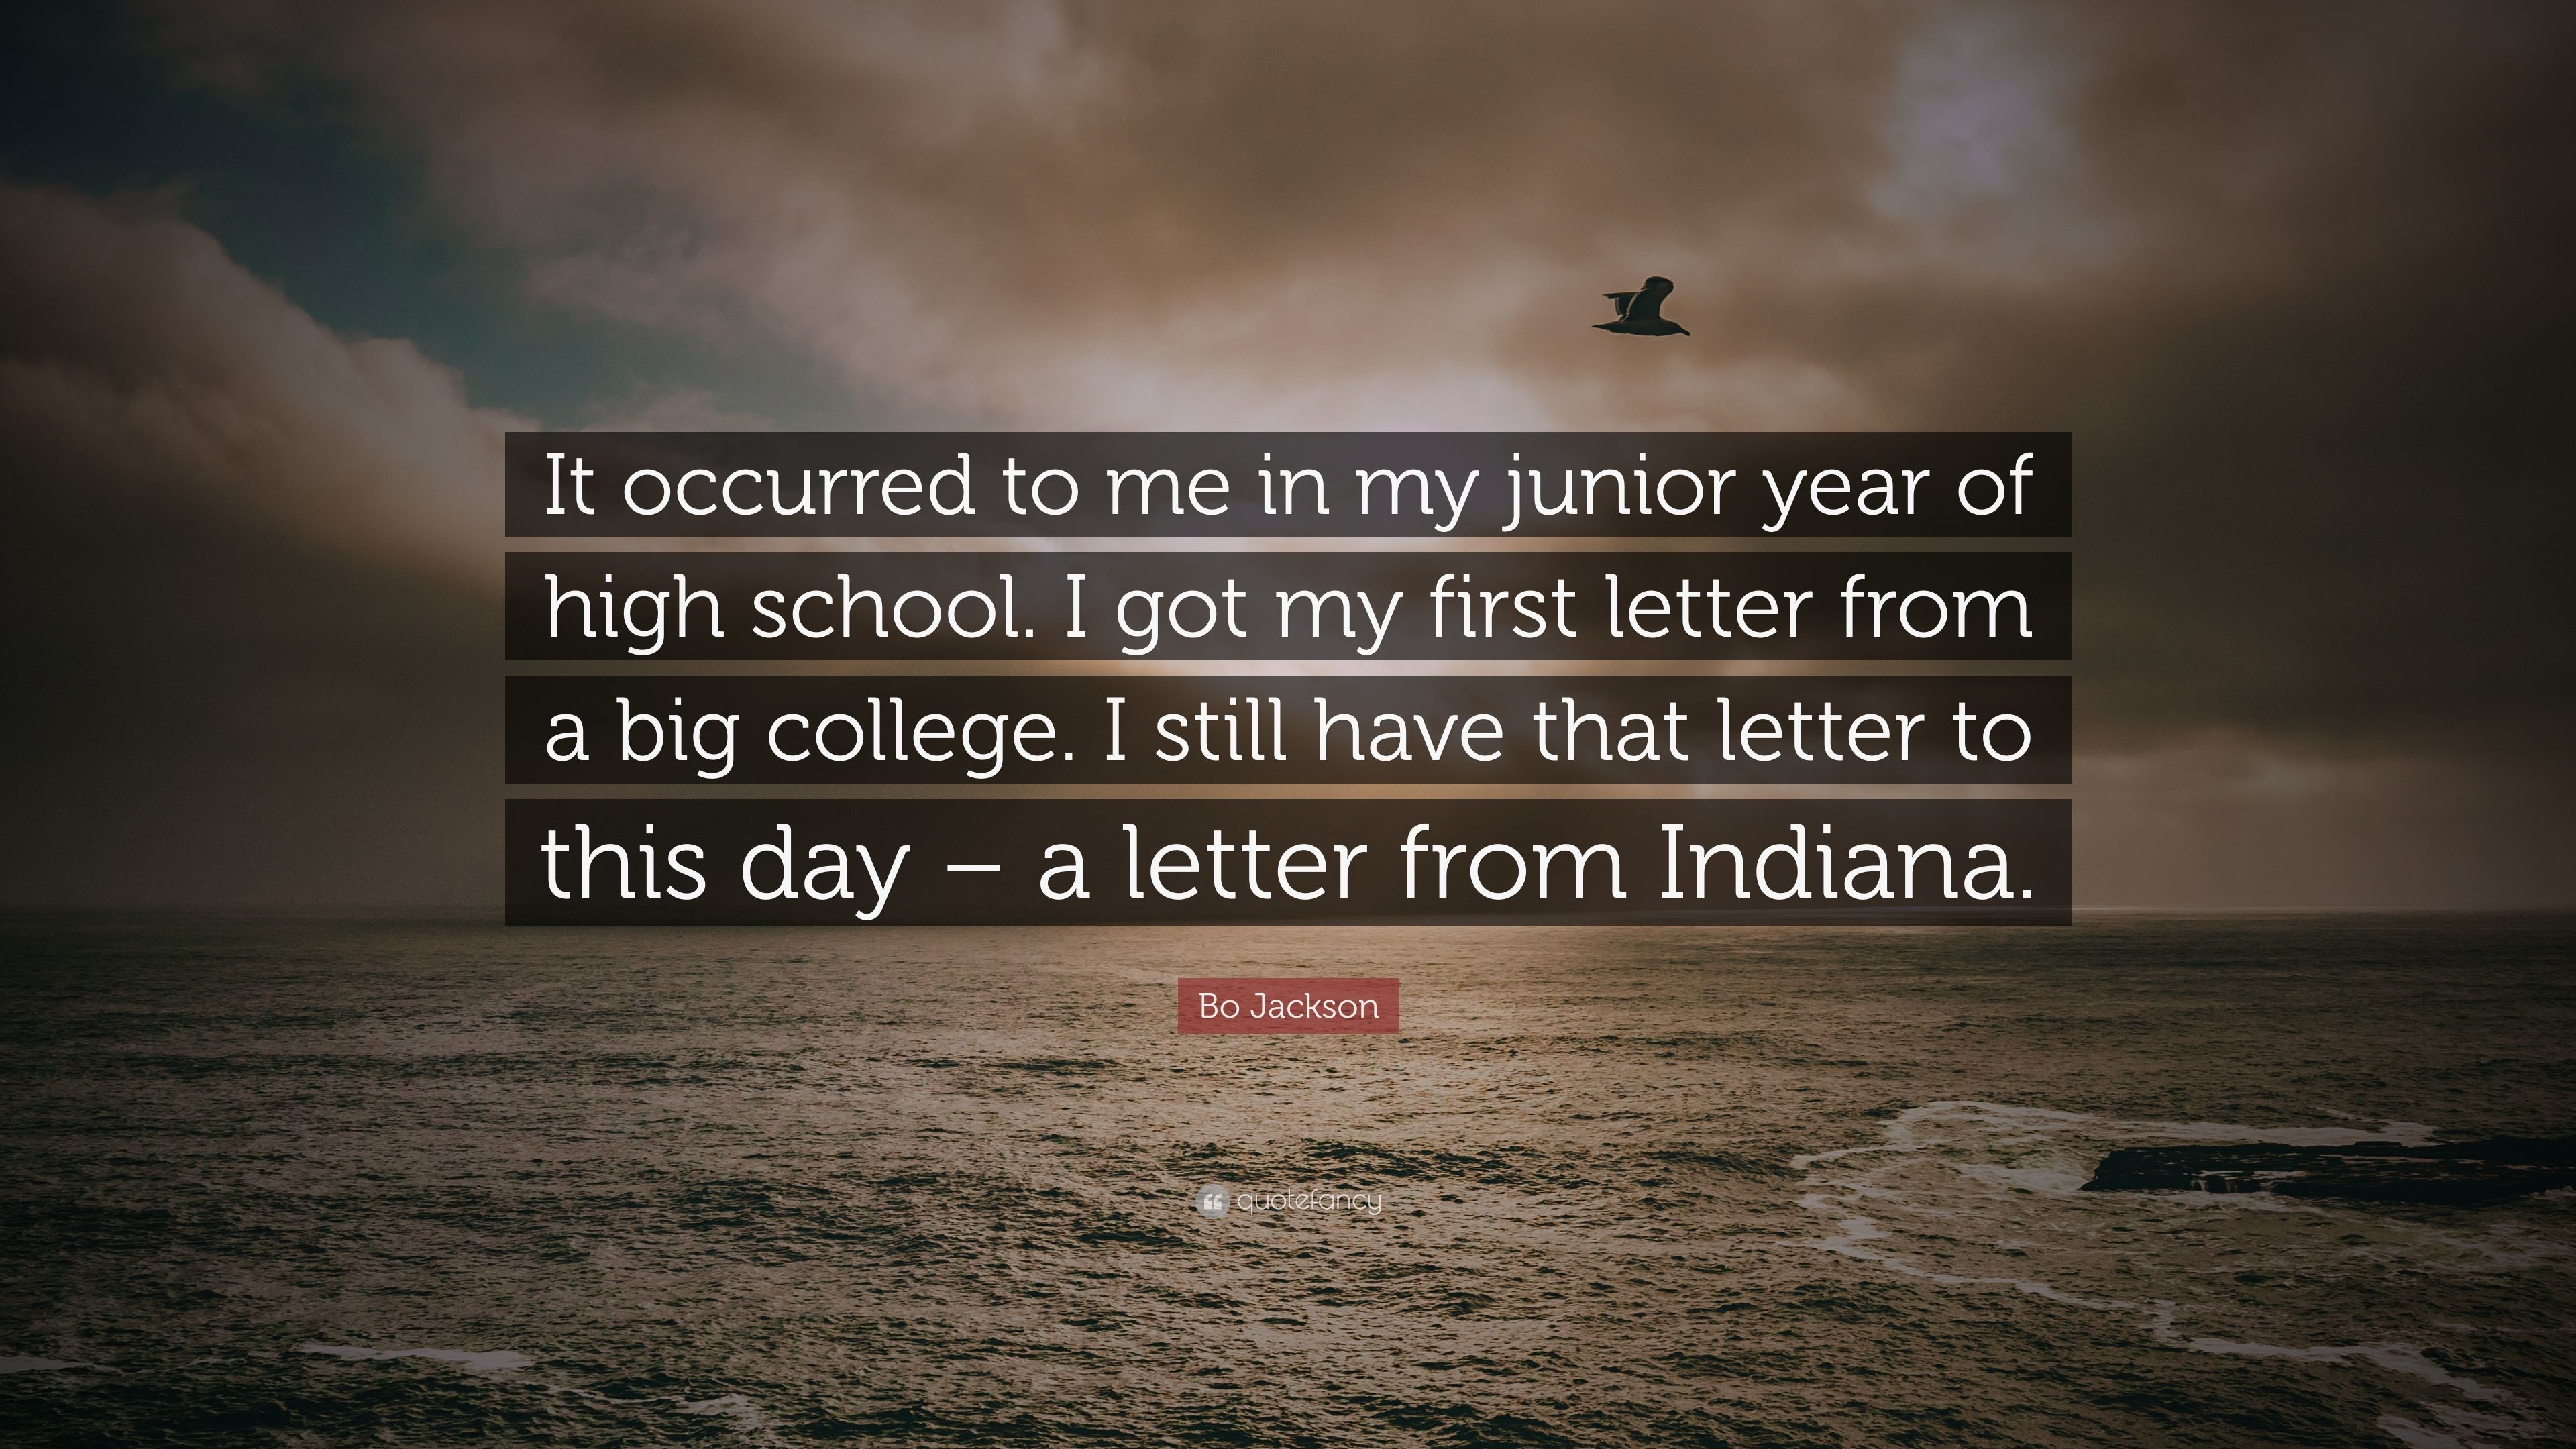 Bo Jackson Quote: “It occurred to me in my junior year of high school